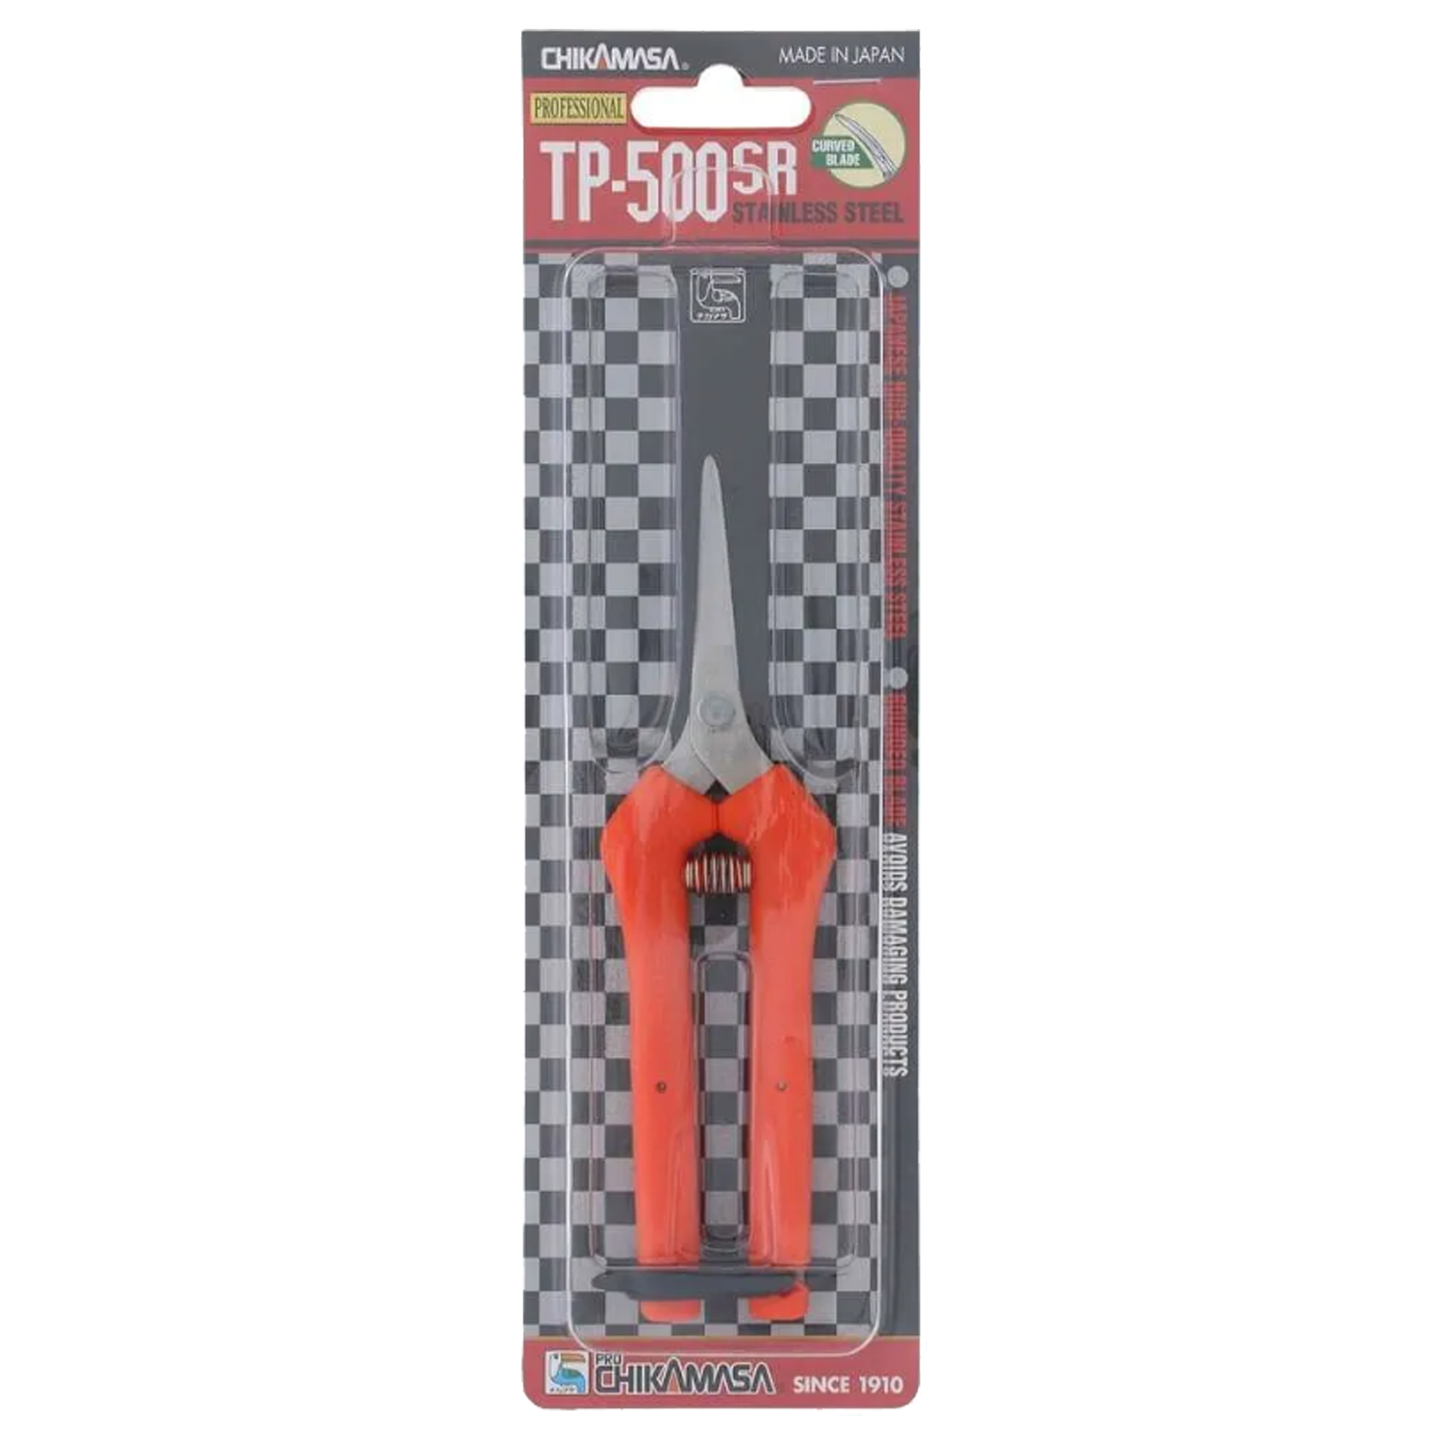 Chikamasa TP-500SR Curved Blade Stainless Steel Shears